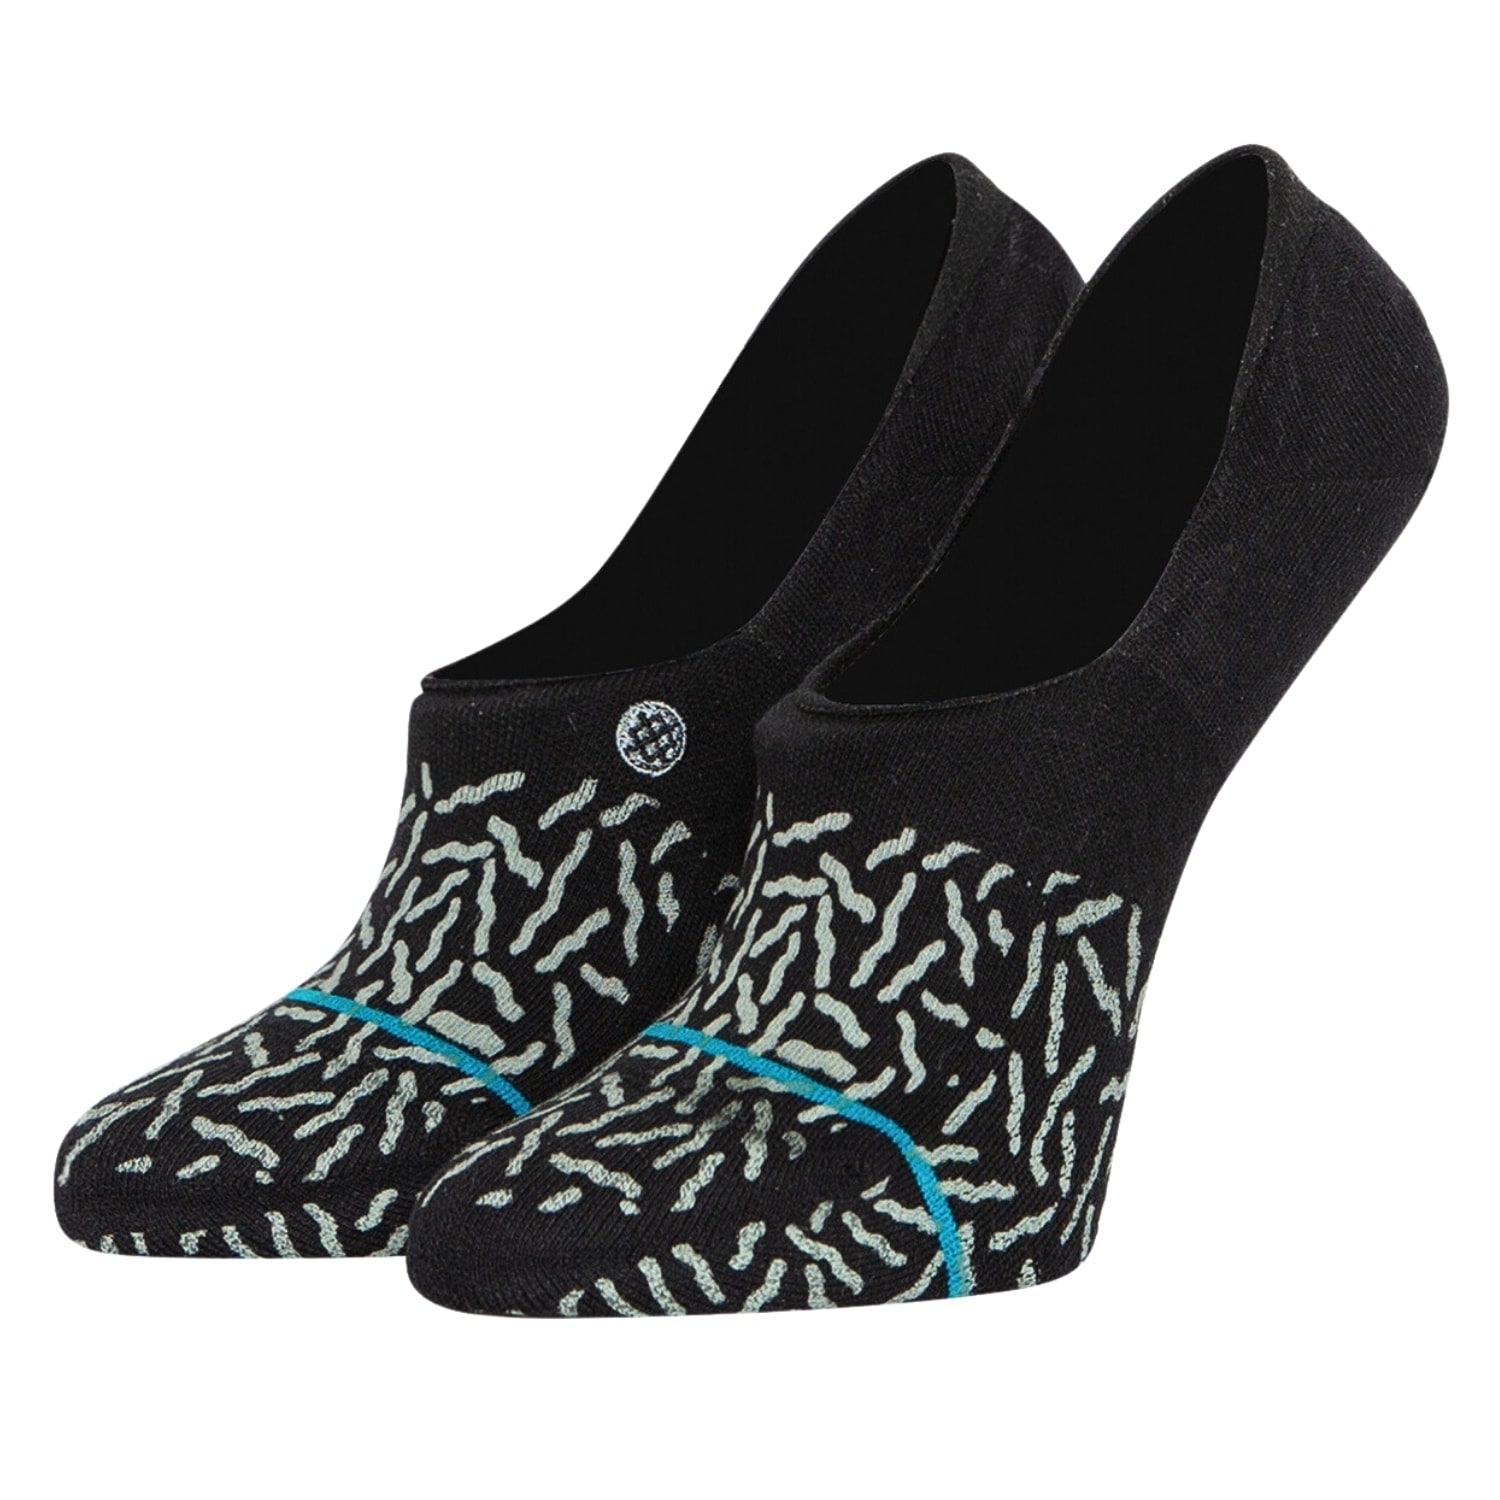 Stance Womens Canoodle No Show/Invisible Socks - Black - Womens Invisible/No Show Socks by Stance M (UK6-8.5)